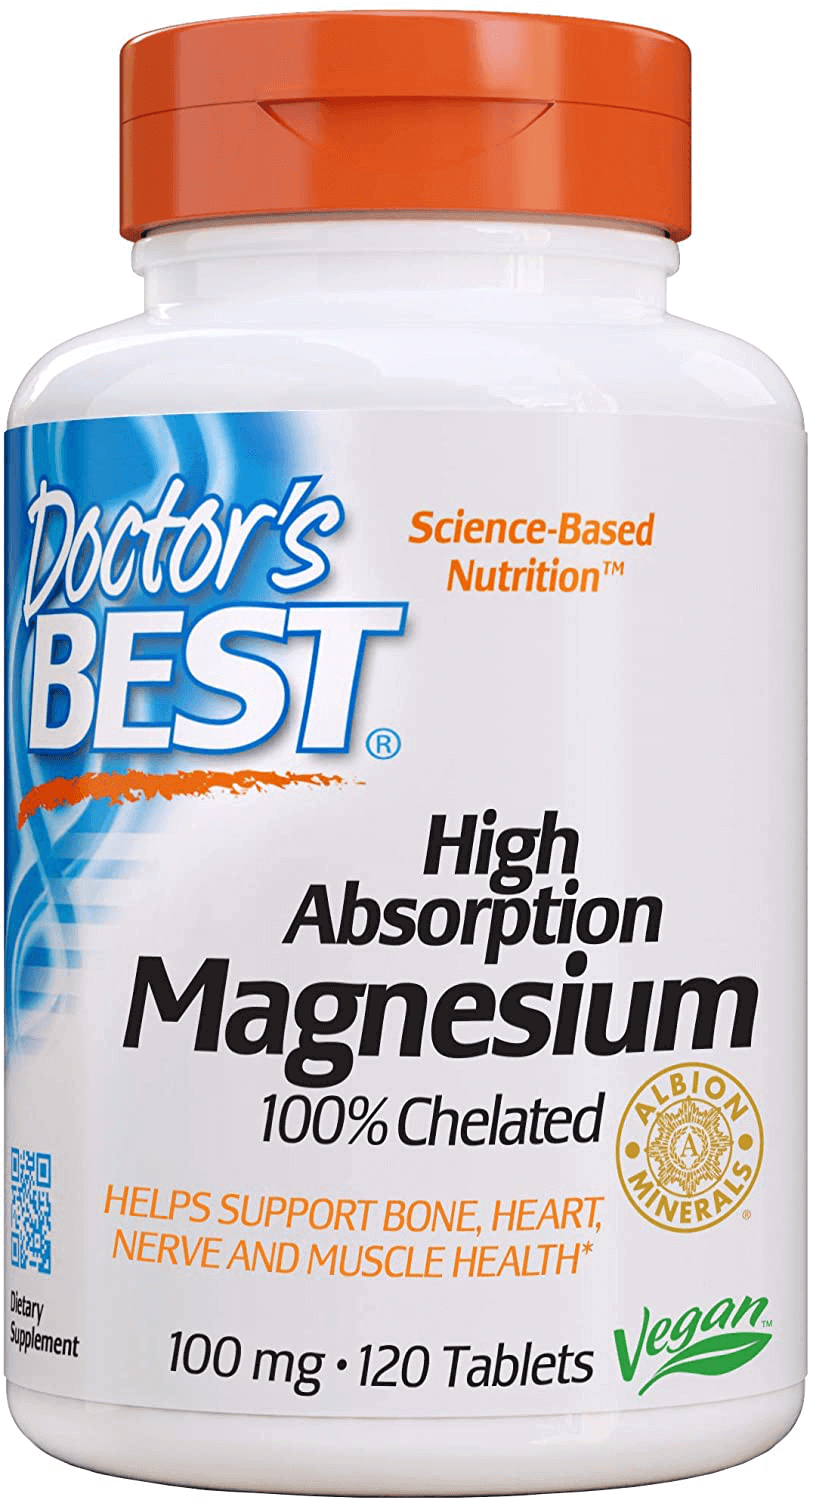 Doctor's Best High Absorption Magnesium Glycinate Lysinate, 100% Chelated, TRACCS, Not Buffered, Headaches, Sleep, Energy, Leg Cramps, Non-GMO, Vegan, Gluten Free, Soy Free, 100 mg, 120 Tablets - vitamenstore.com